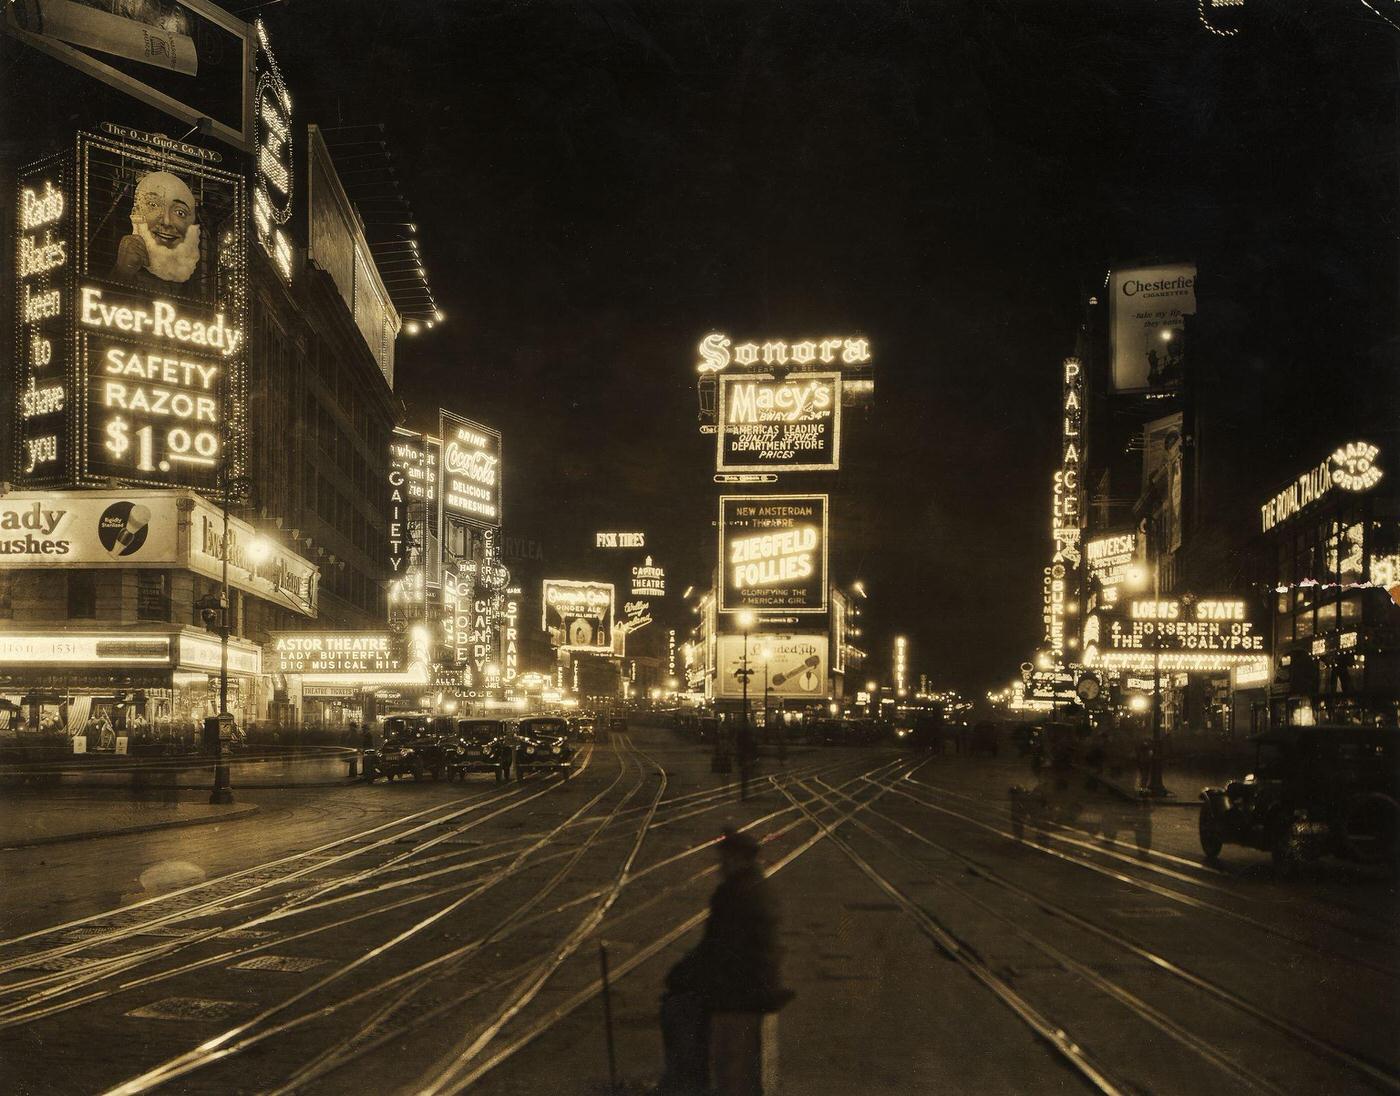 View Of Traffic And Illuminated Advertisements In Times Square At Night, Manhattan, 1921.